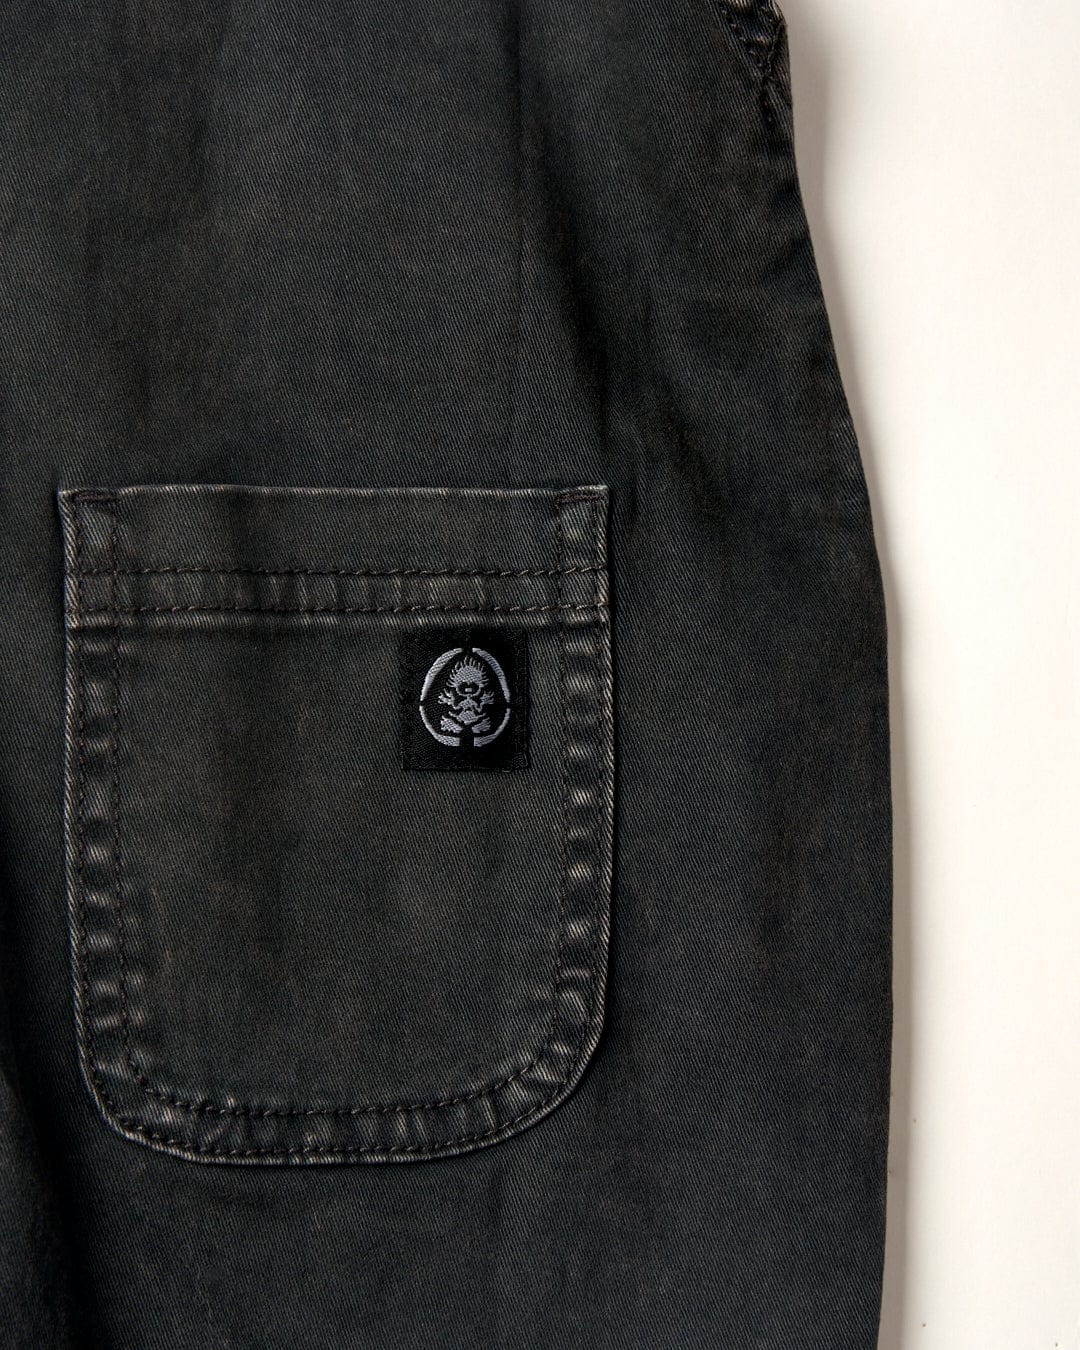 Close-up of an acid wash denim pocket with a stitched label featuring a skull design, part of the Lyn-Z - Kids Dungarees - Washed Black collection by Saltrock.